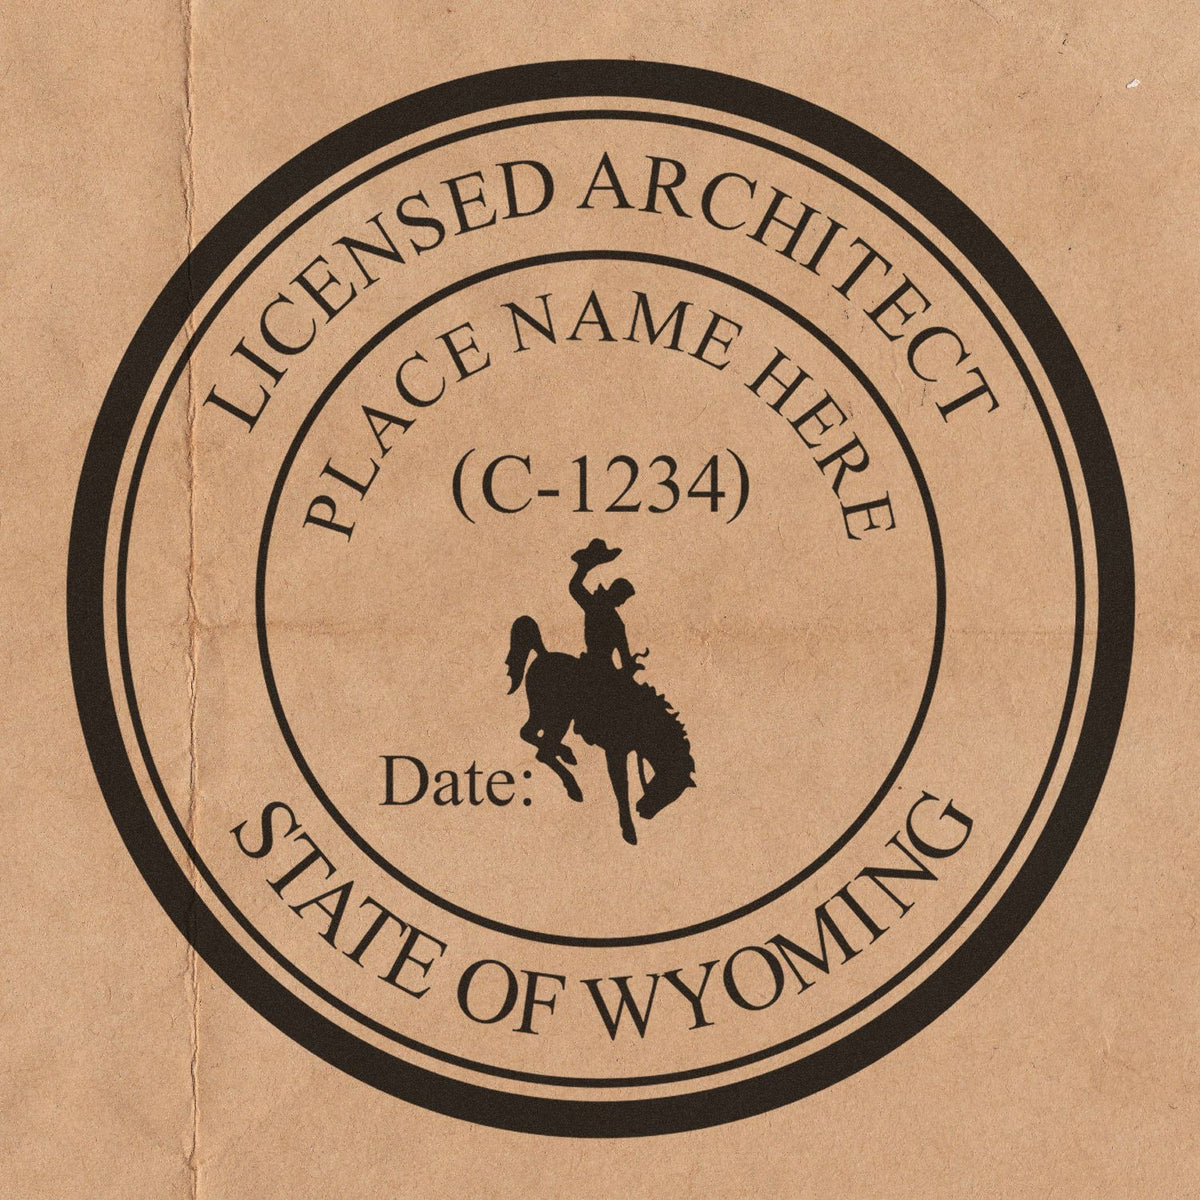 Slim Pre-Inked Wyoming Architect Seal Stamp in use photo showing a stamped imprint of the Slim Pre-Inked Wyoming Architect Seal Stamp